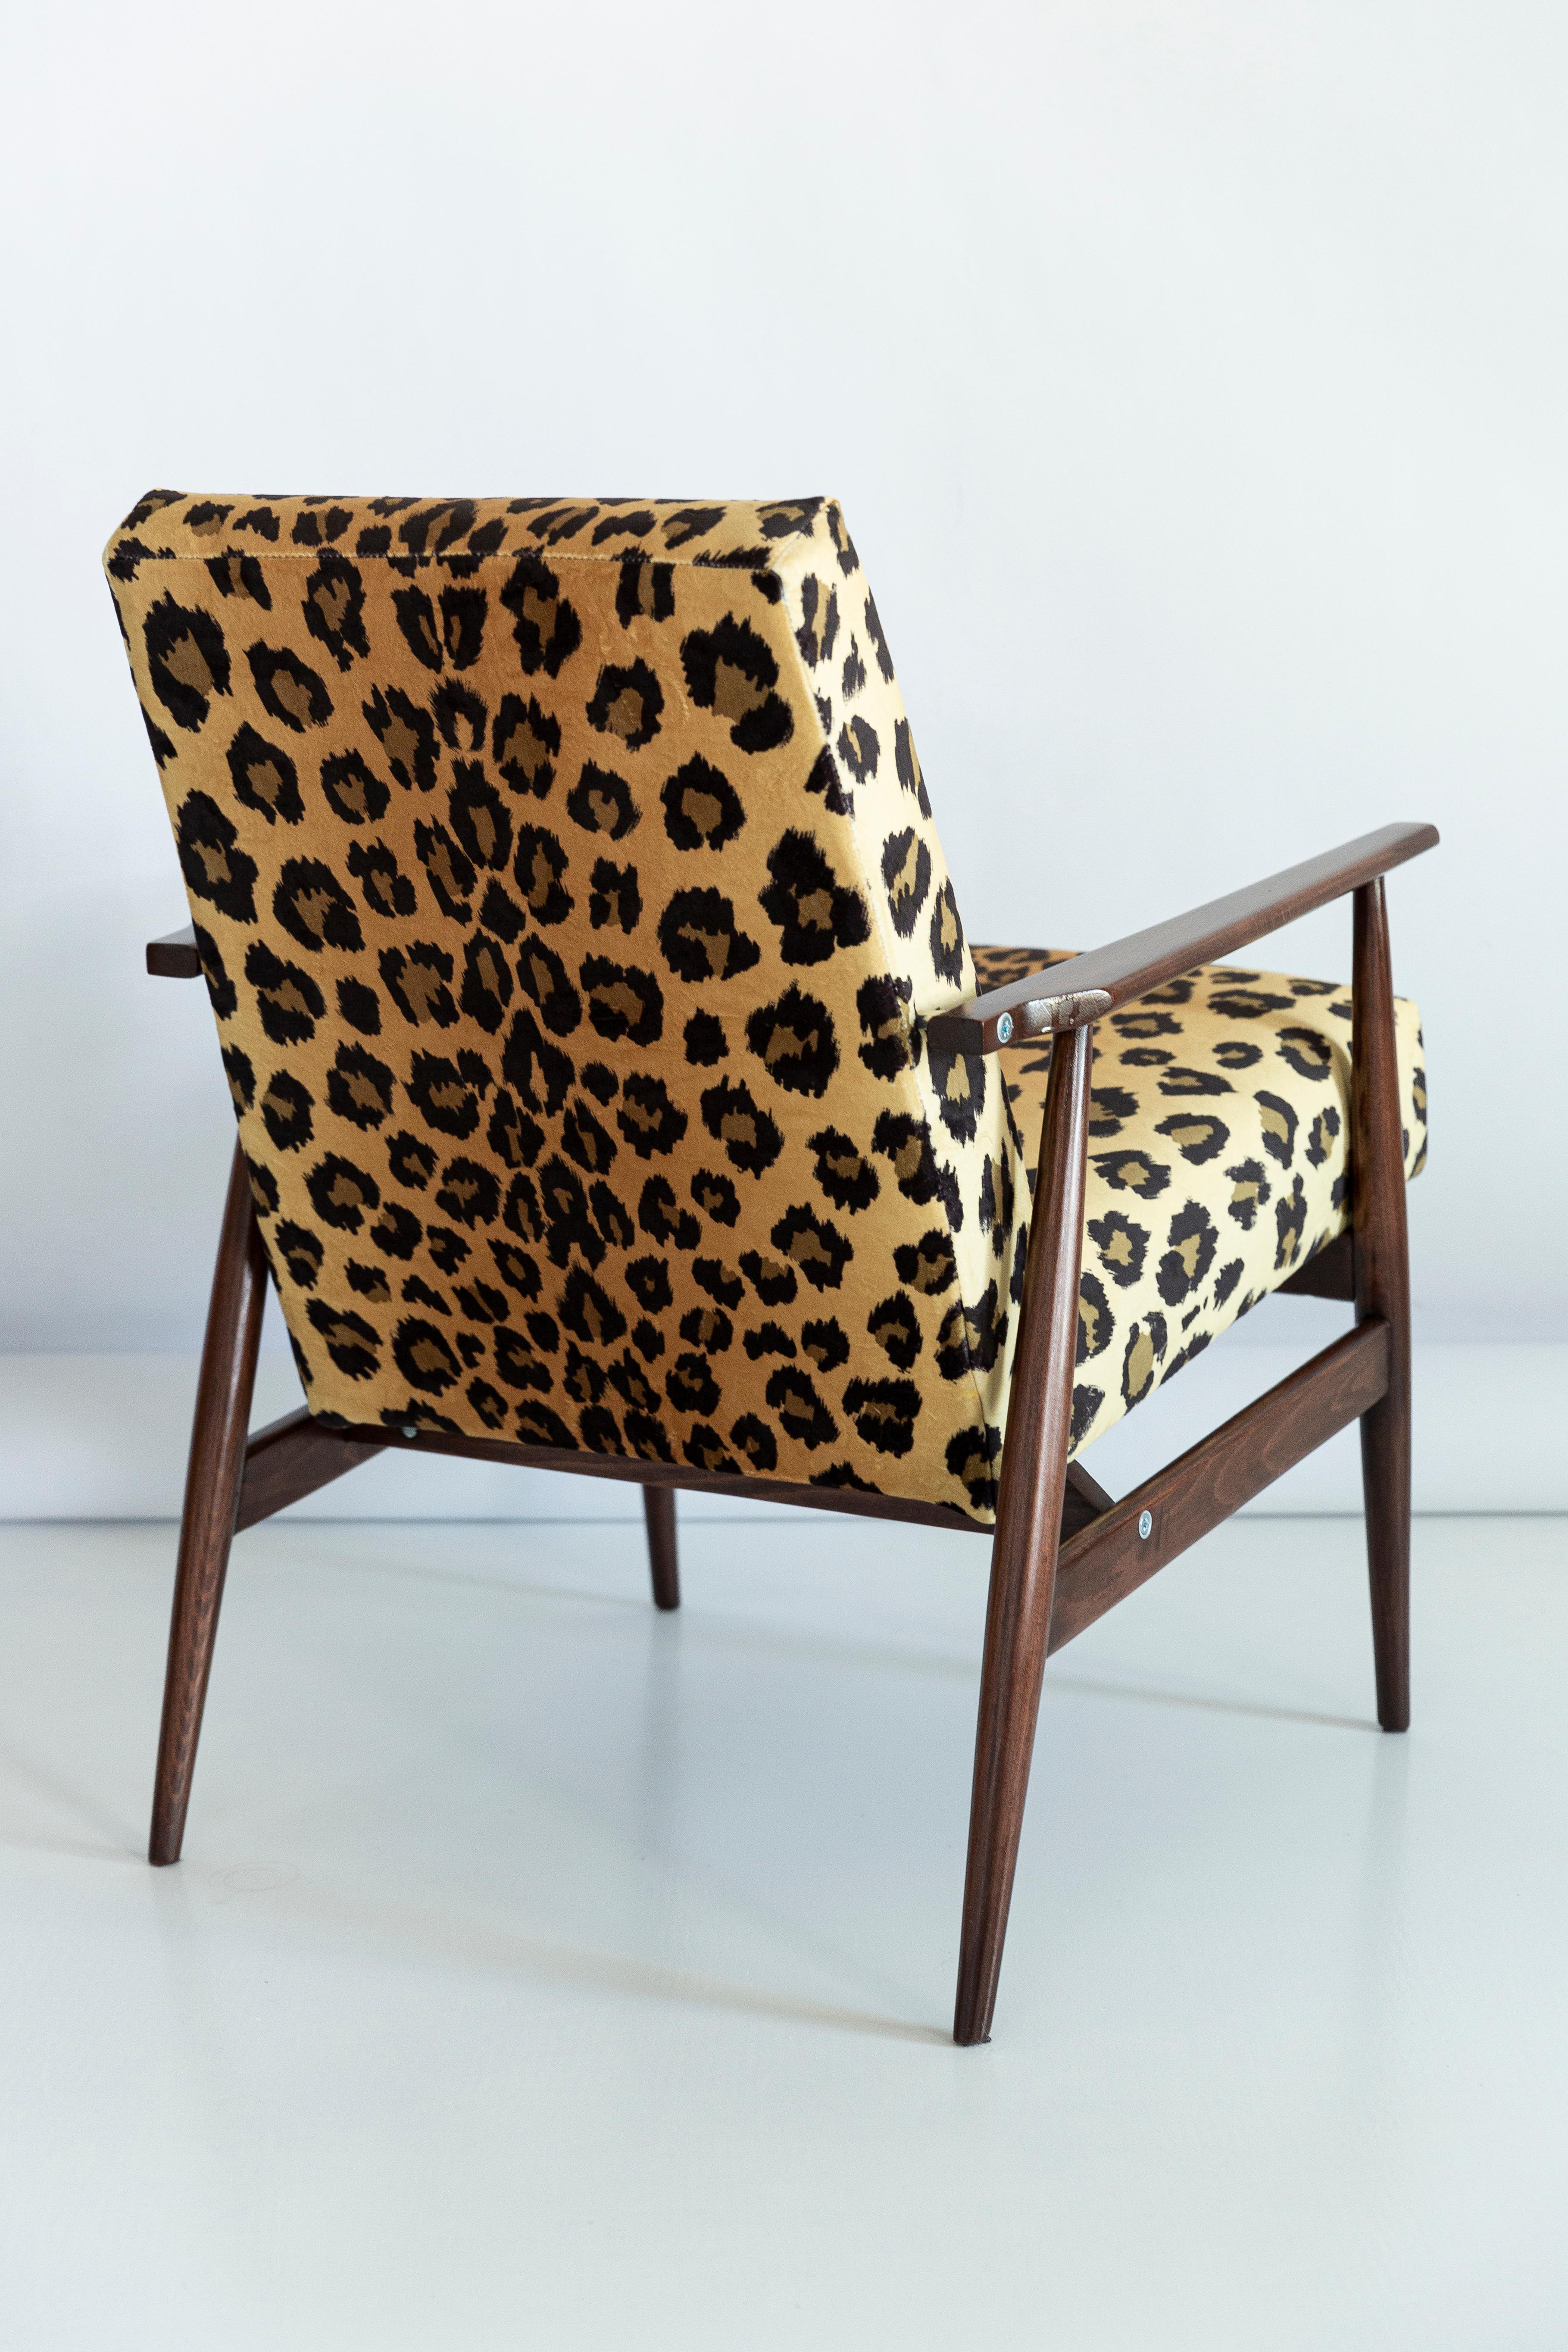 Hand-Crafted Set of Eight Midcentury Leopard Print Velvet Dante Armchairs, H. Lis, 1960s For Sale